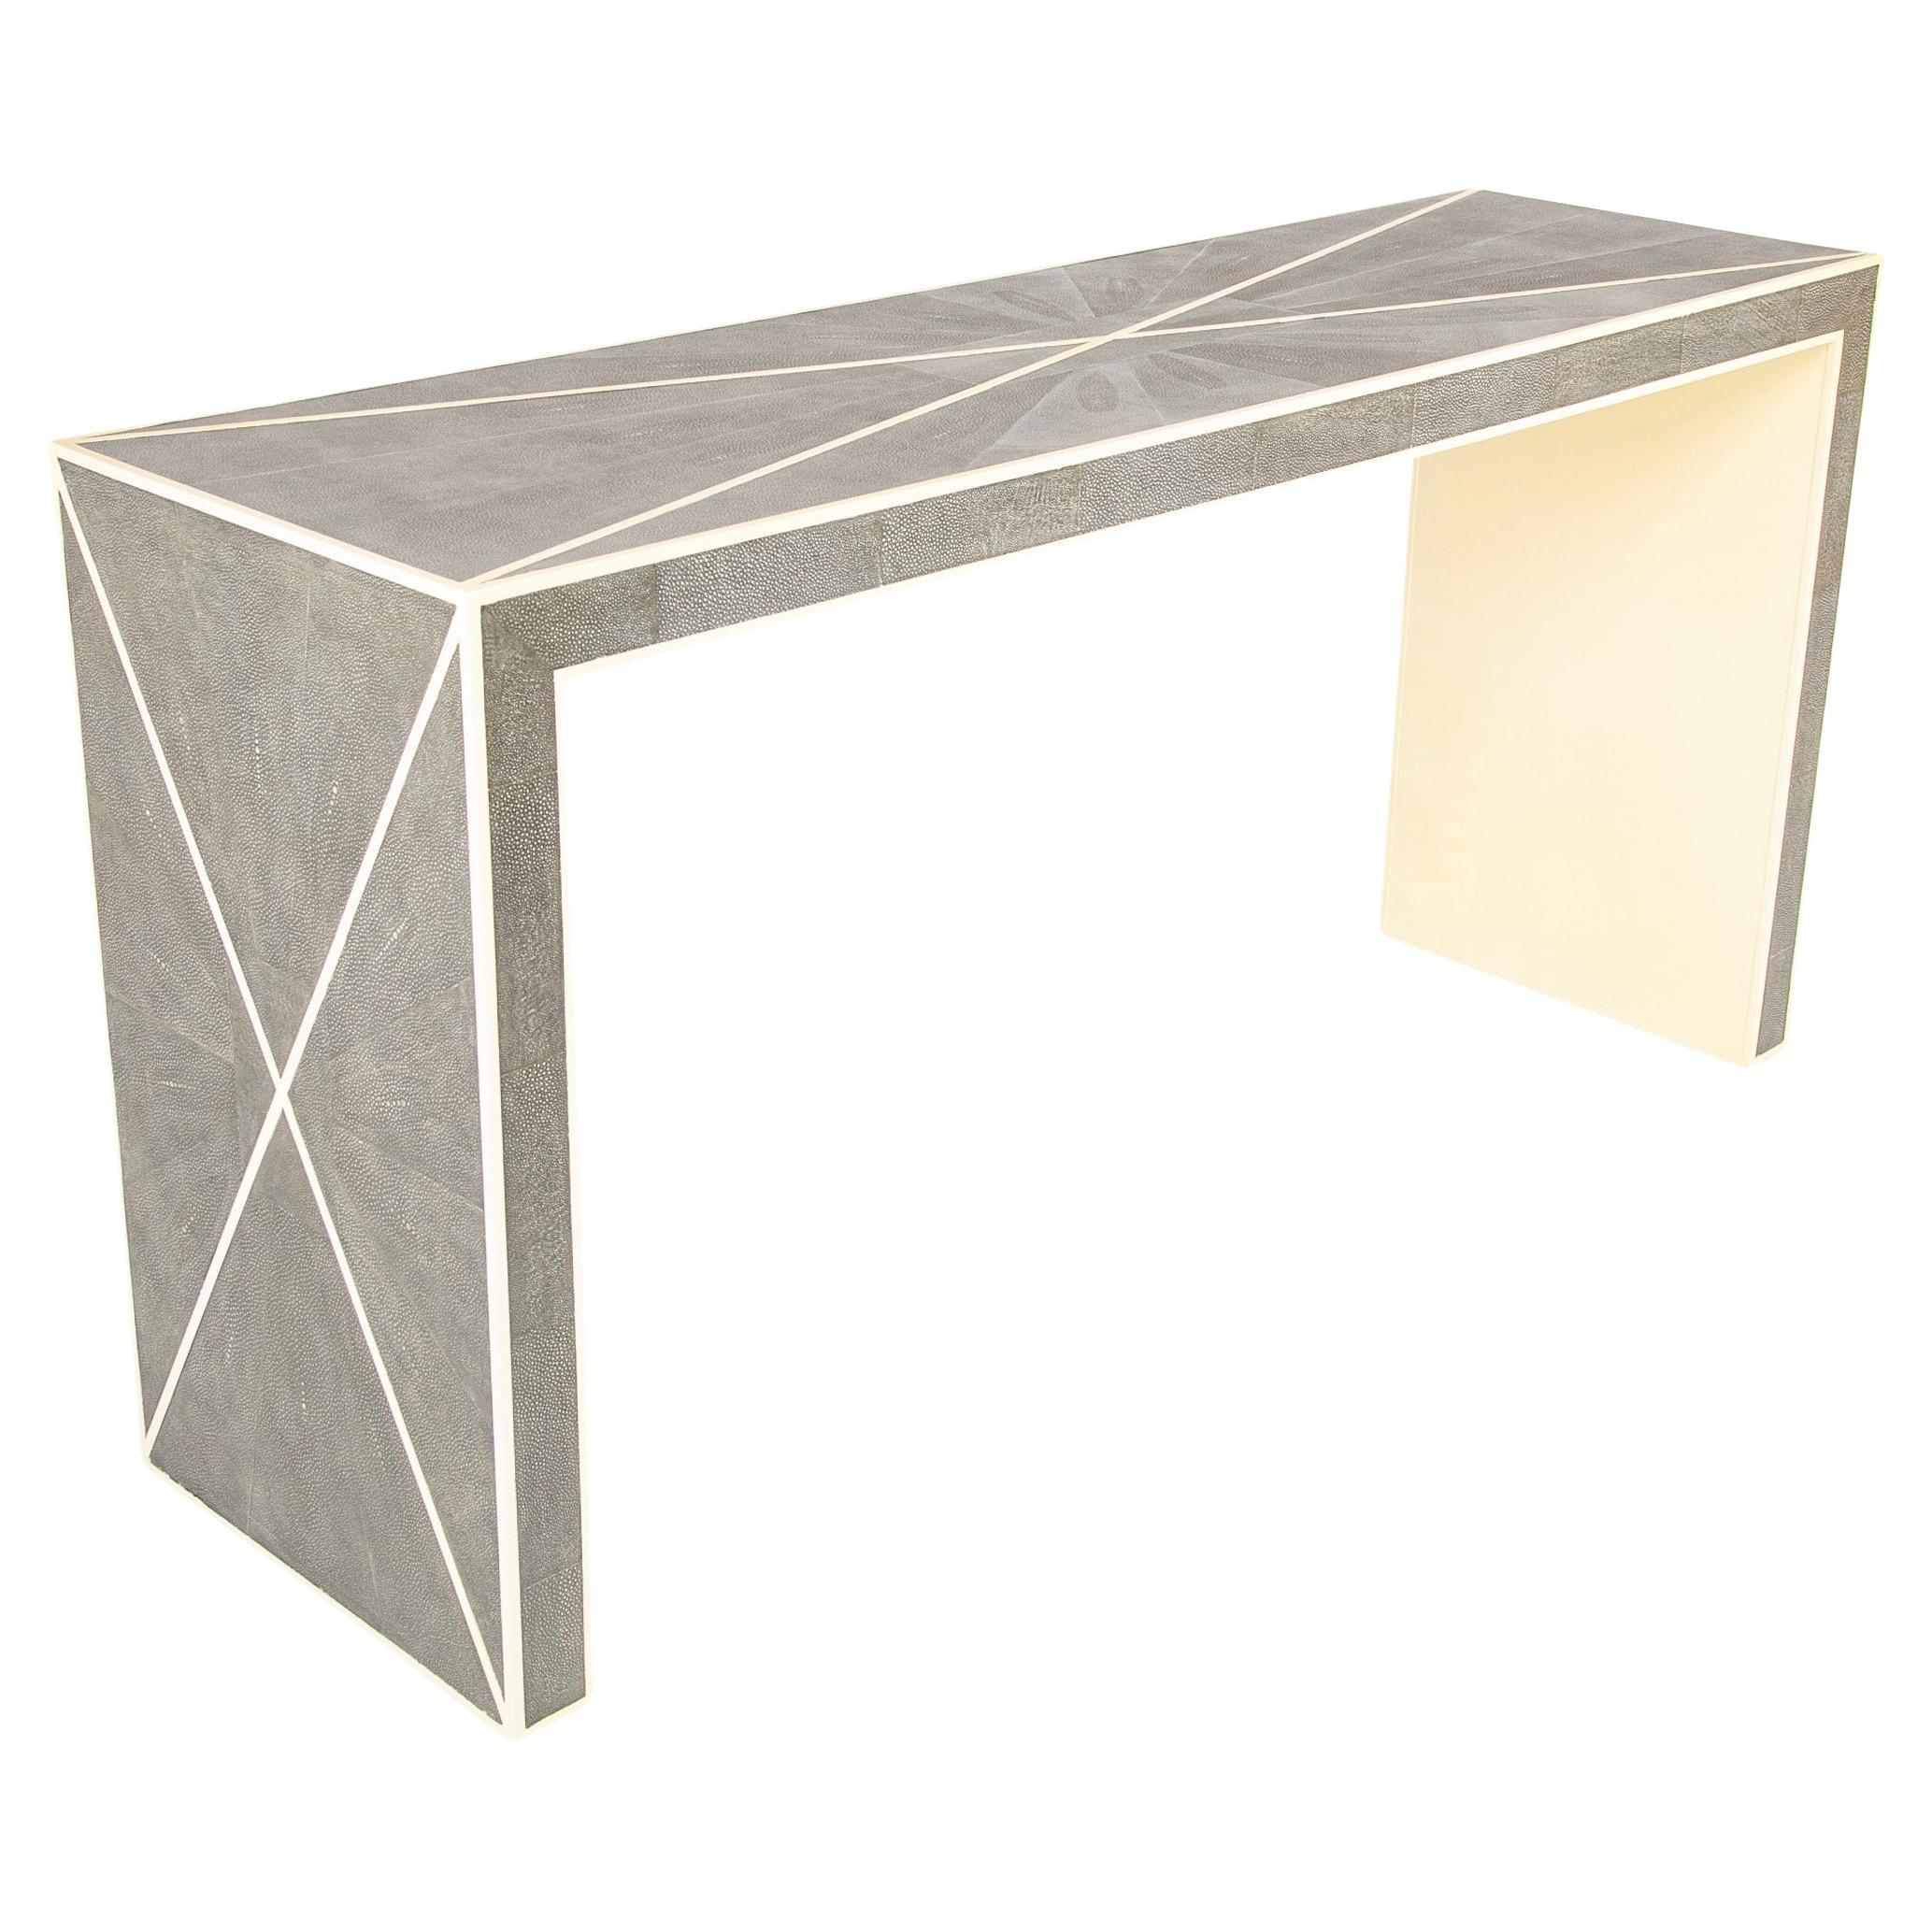 Karl Springer Style Shagreen and Cream Lacquer Console Table by Maitland Smith